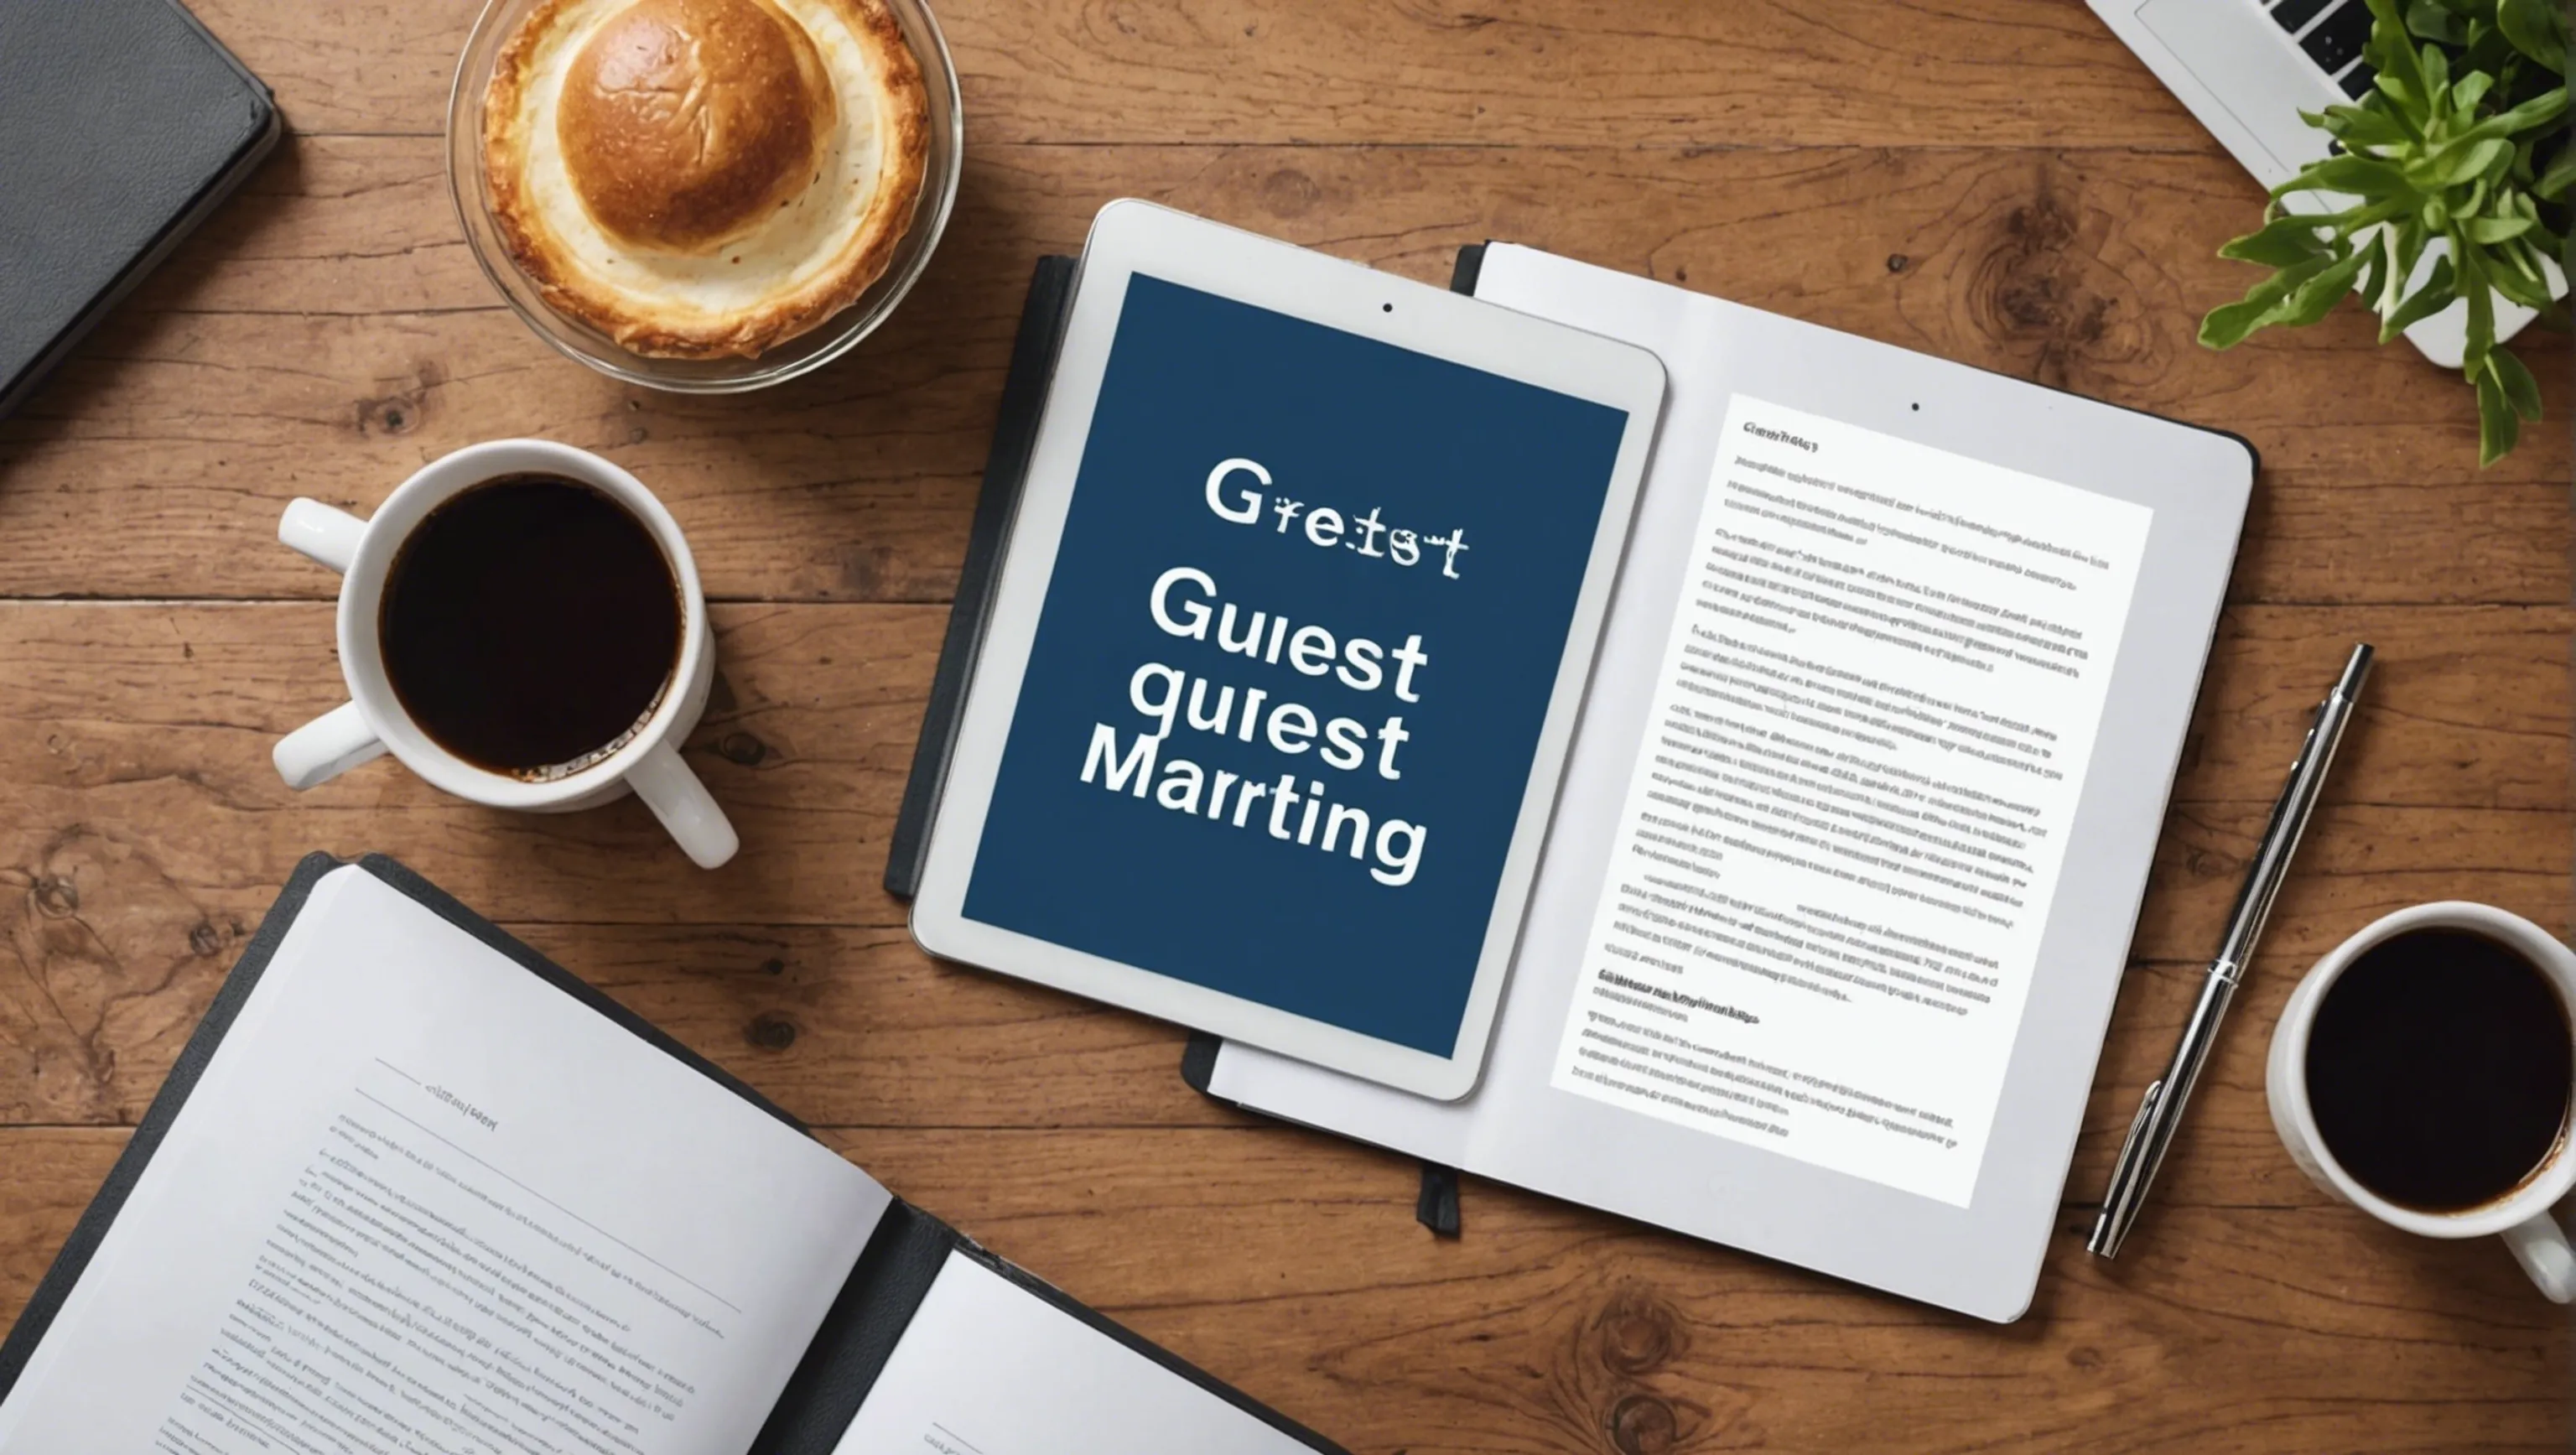 Guest posting opportunities to boost your content marketing strategy